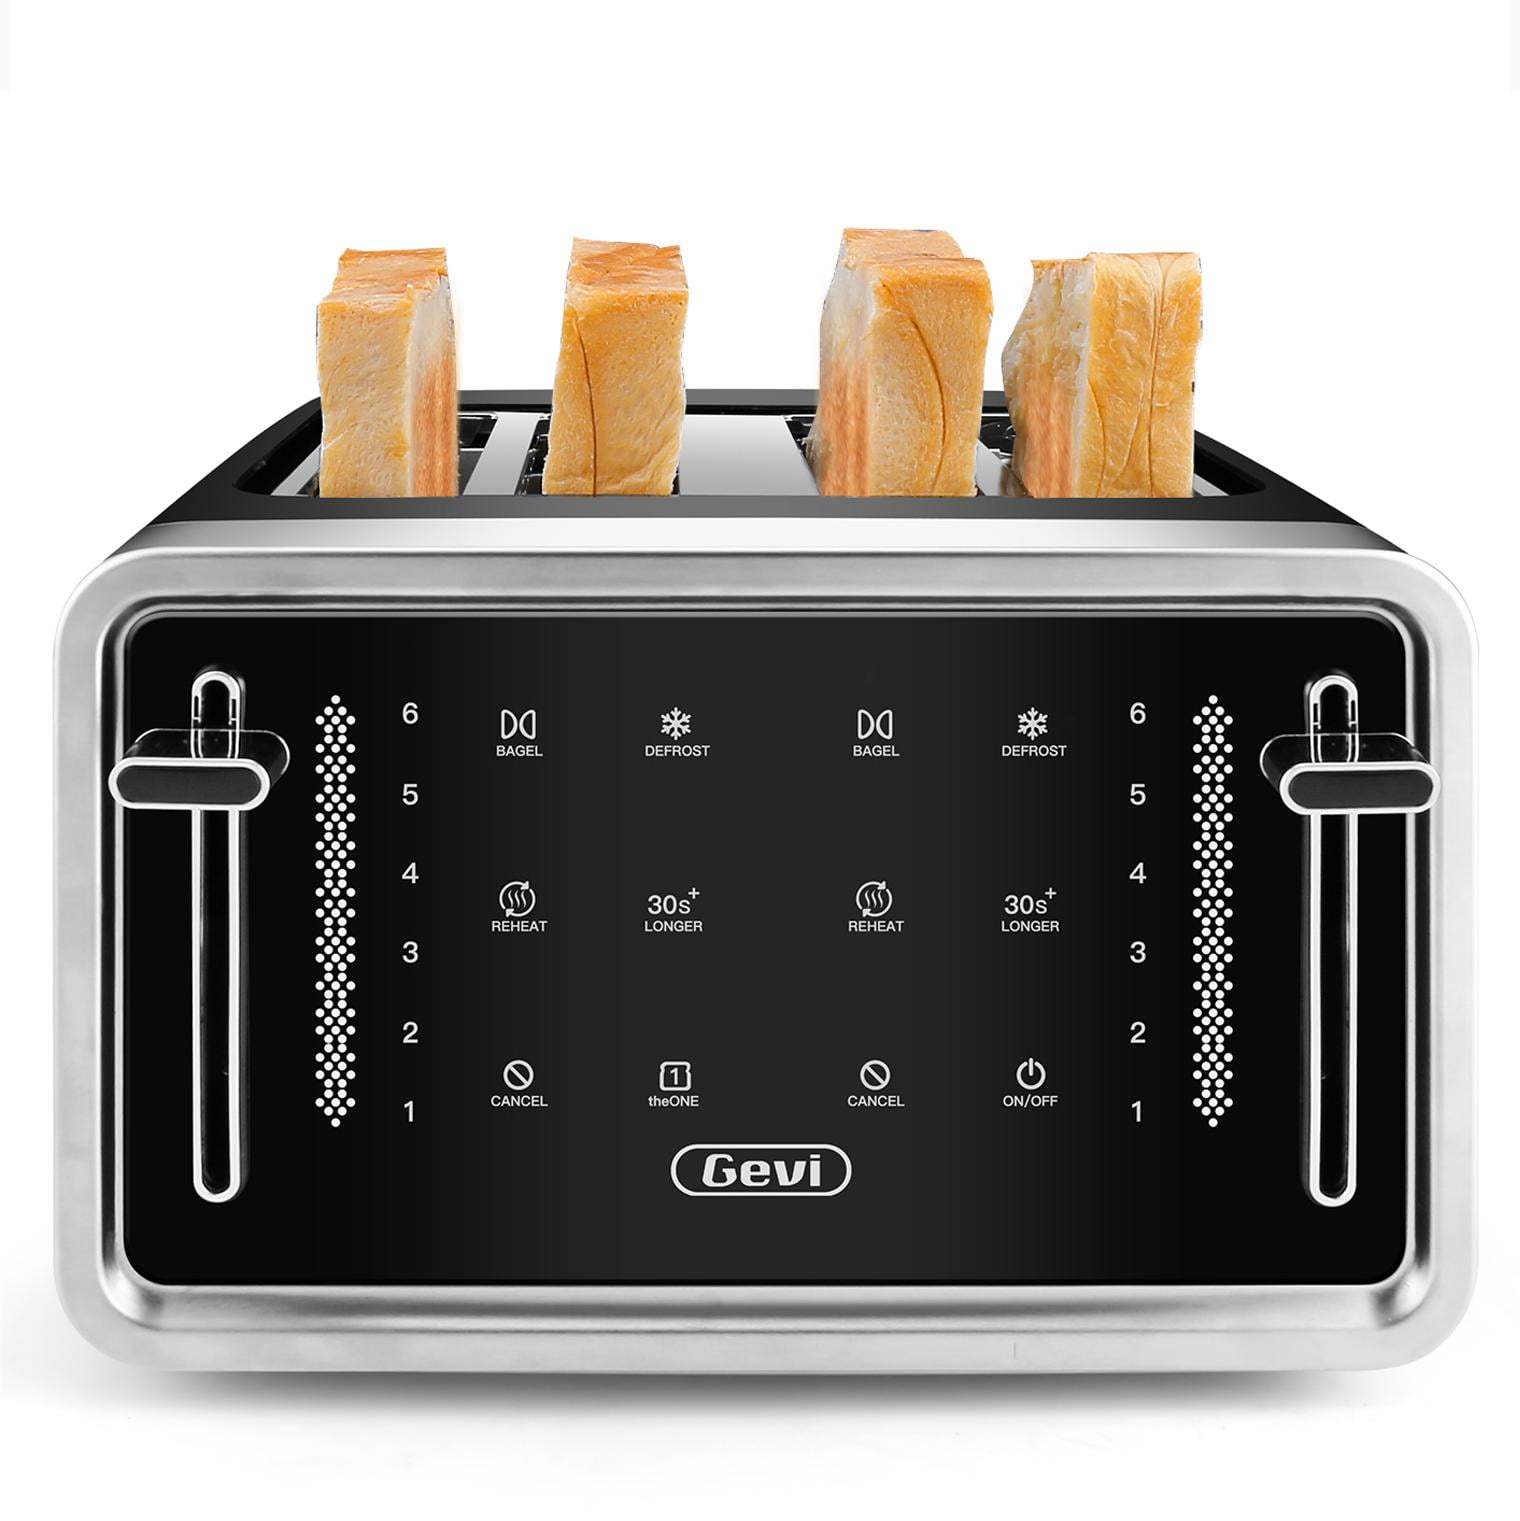 Elite Gourmet ECT118B Cool Touch Single Slice Toaster, 6 Toasting Levels &  Wide Slot for Bagels, Waffles, Specialty Breads, Pastry, Snacks, Black